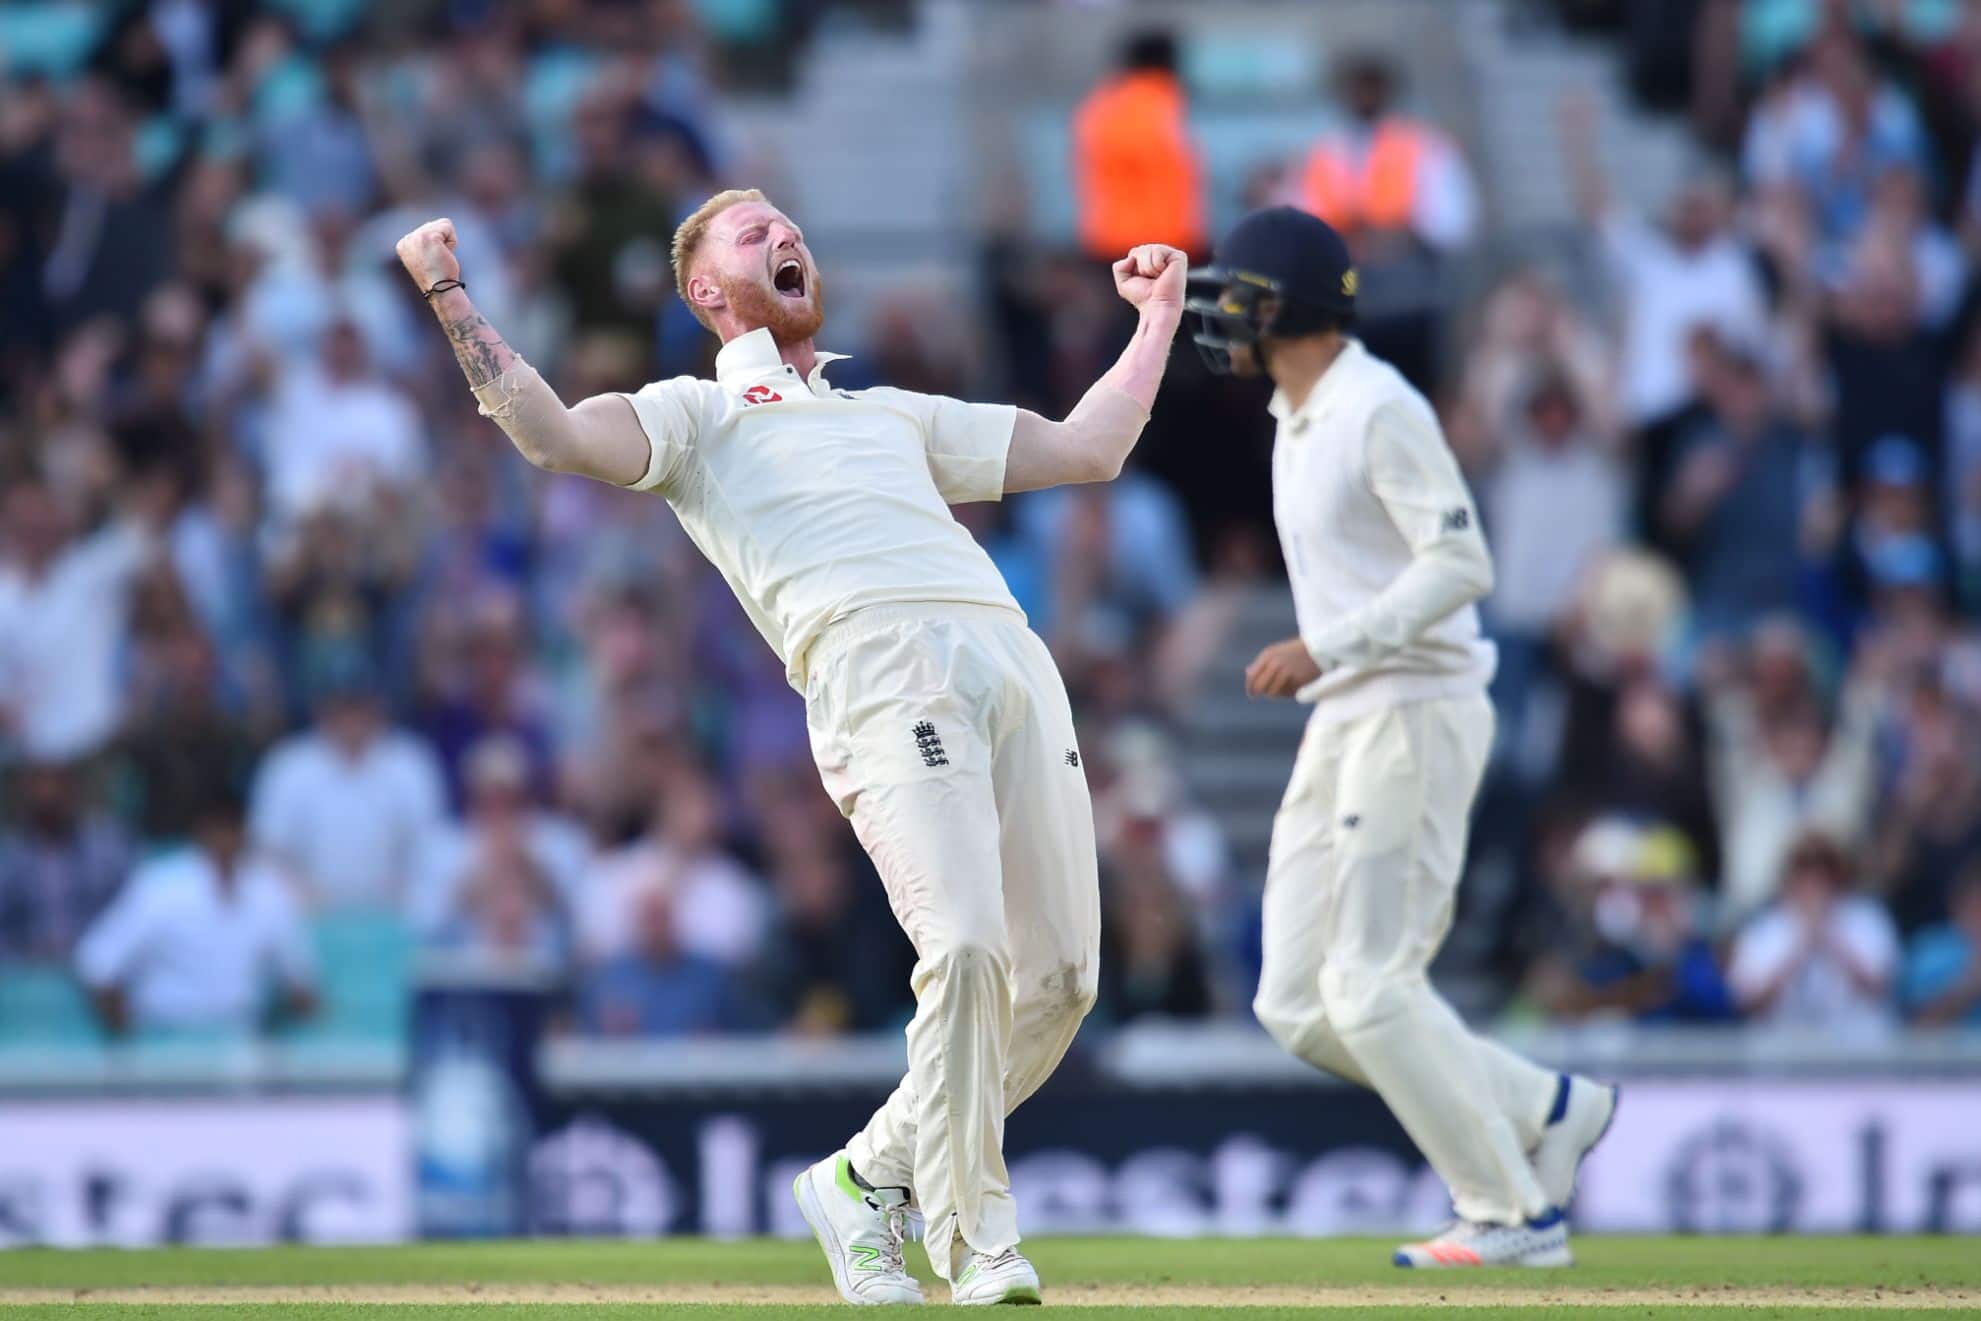 Ashes 2023 | 'For England to Win, Ben Stokes Has to be Fully Fit to Bowl': Brad Hogg